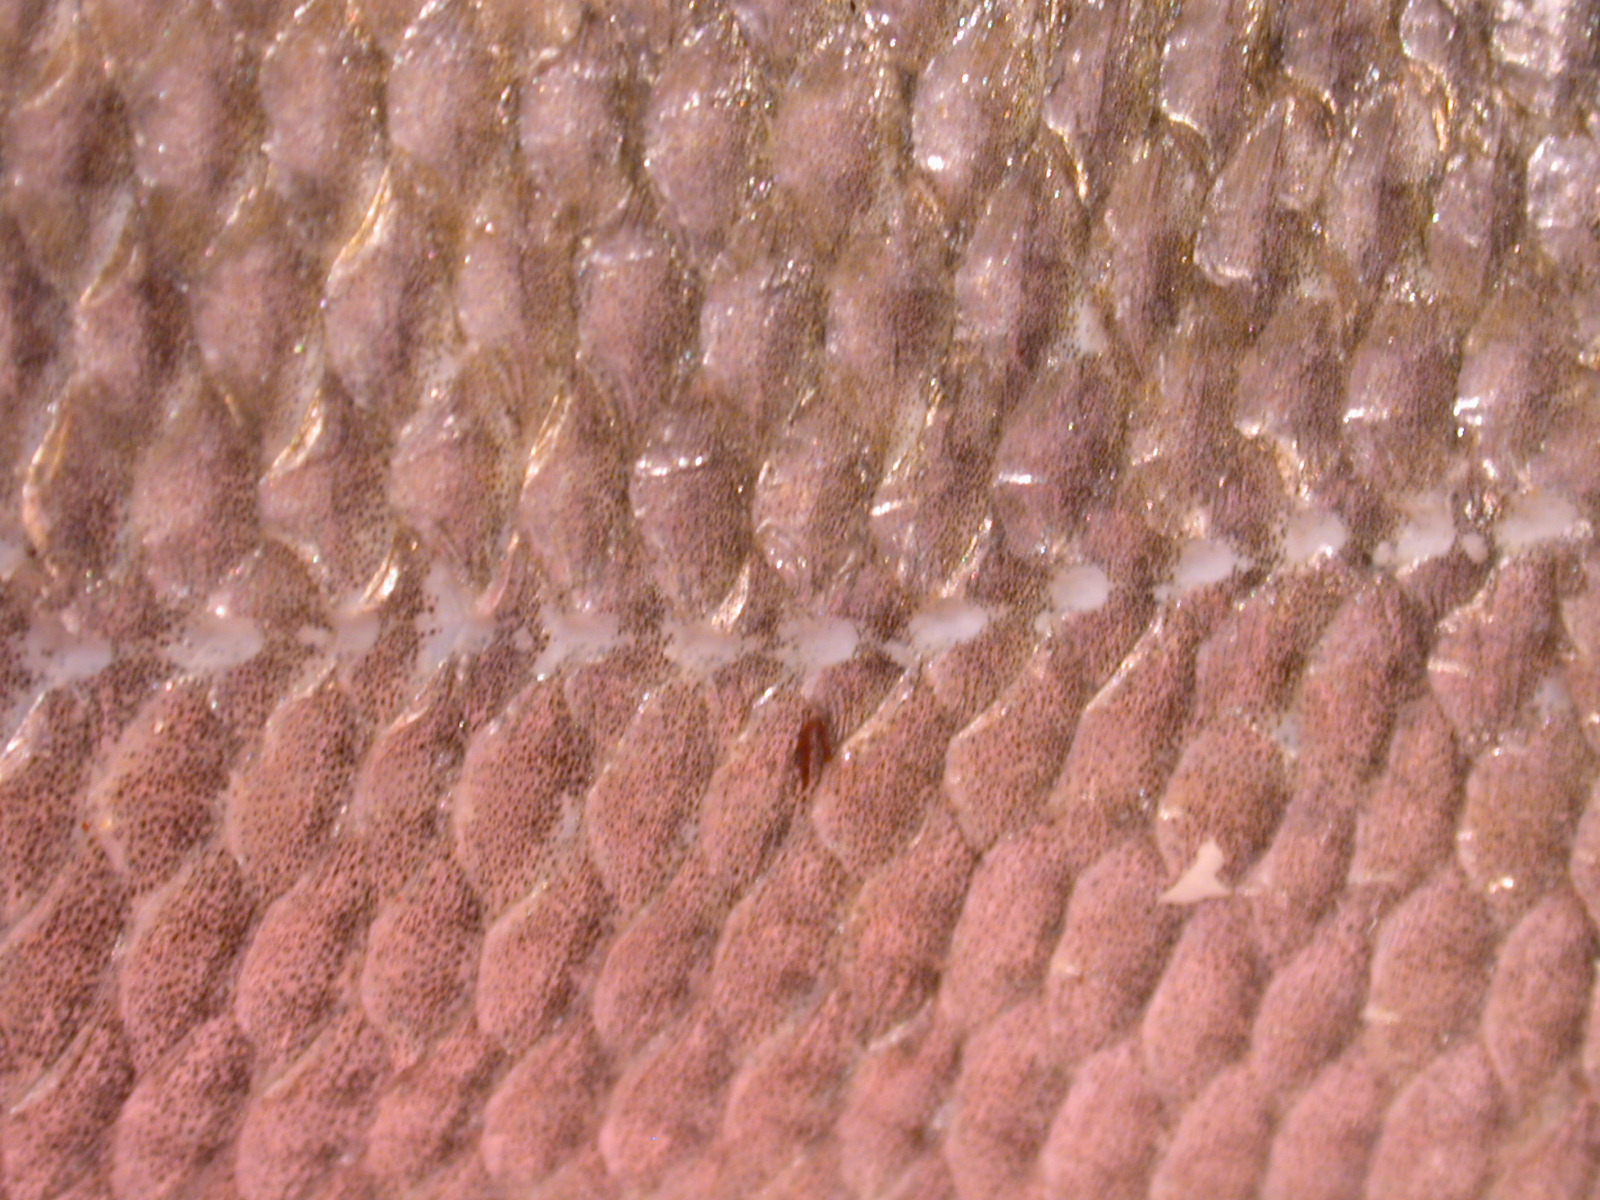 Image*After : photos : fish fishy scale scales salmon pink